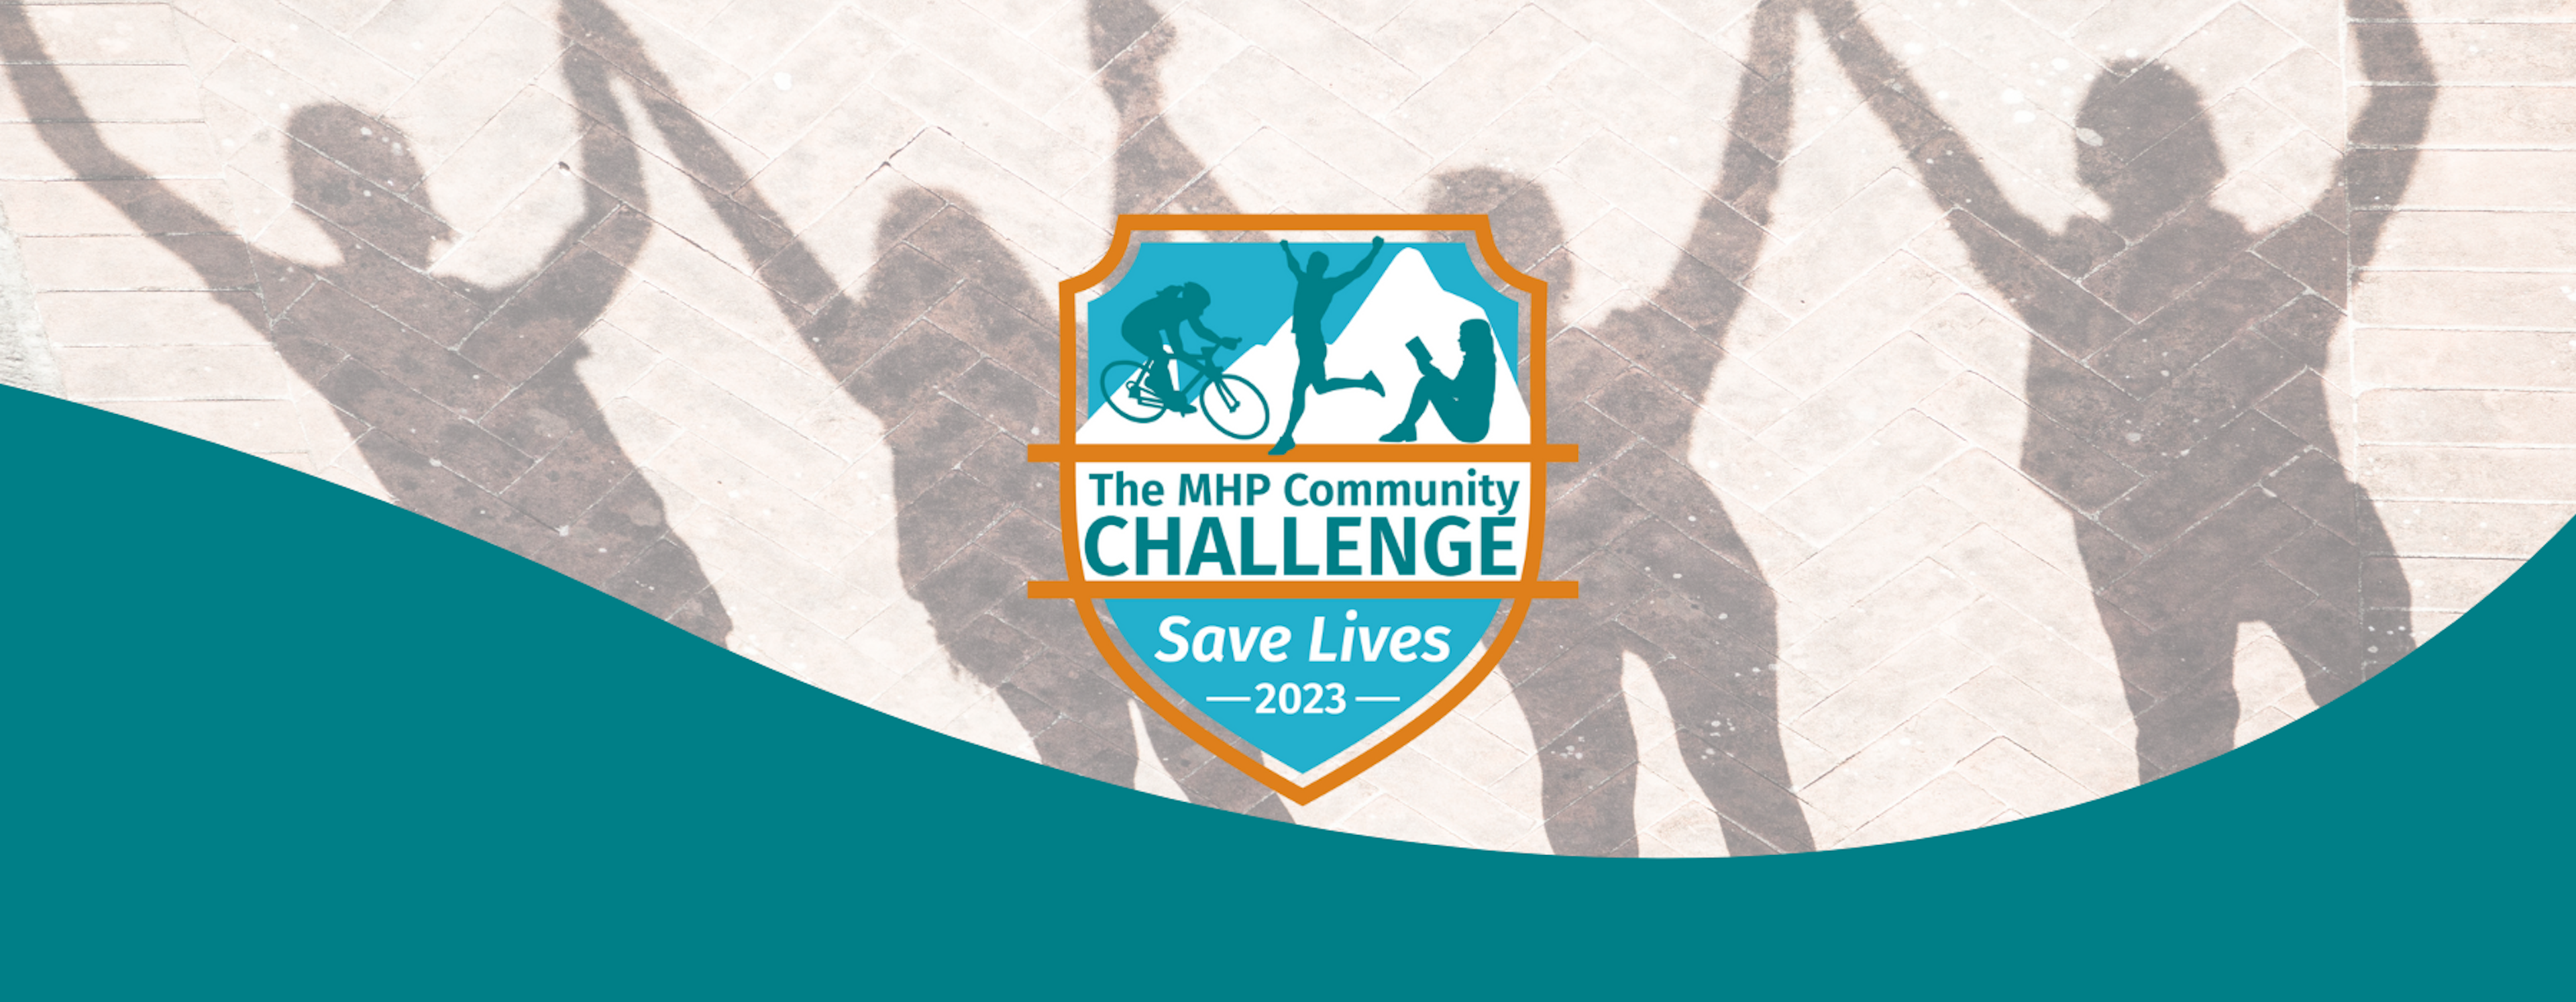 Help Save Lives Join the Challenge: Shadows of people holding hands. MHP Community challenge logo.